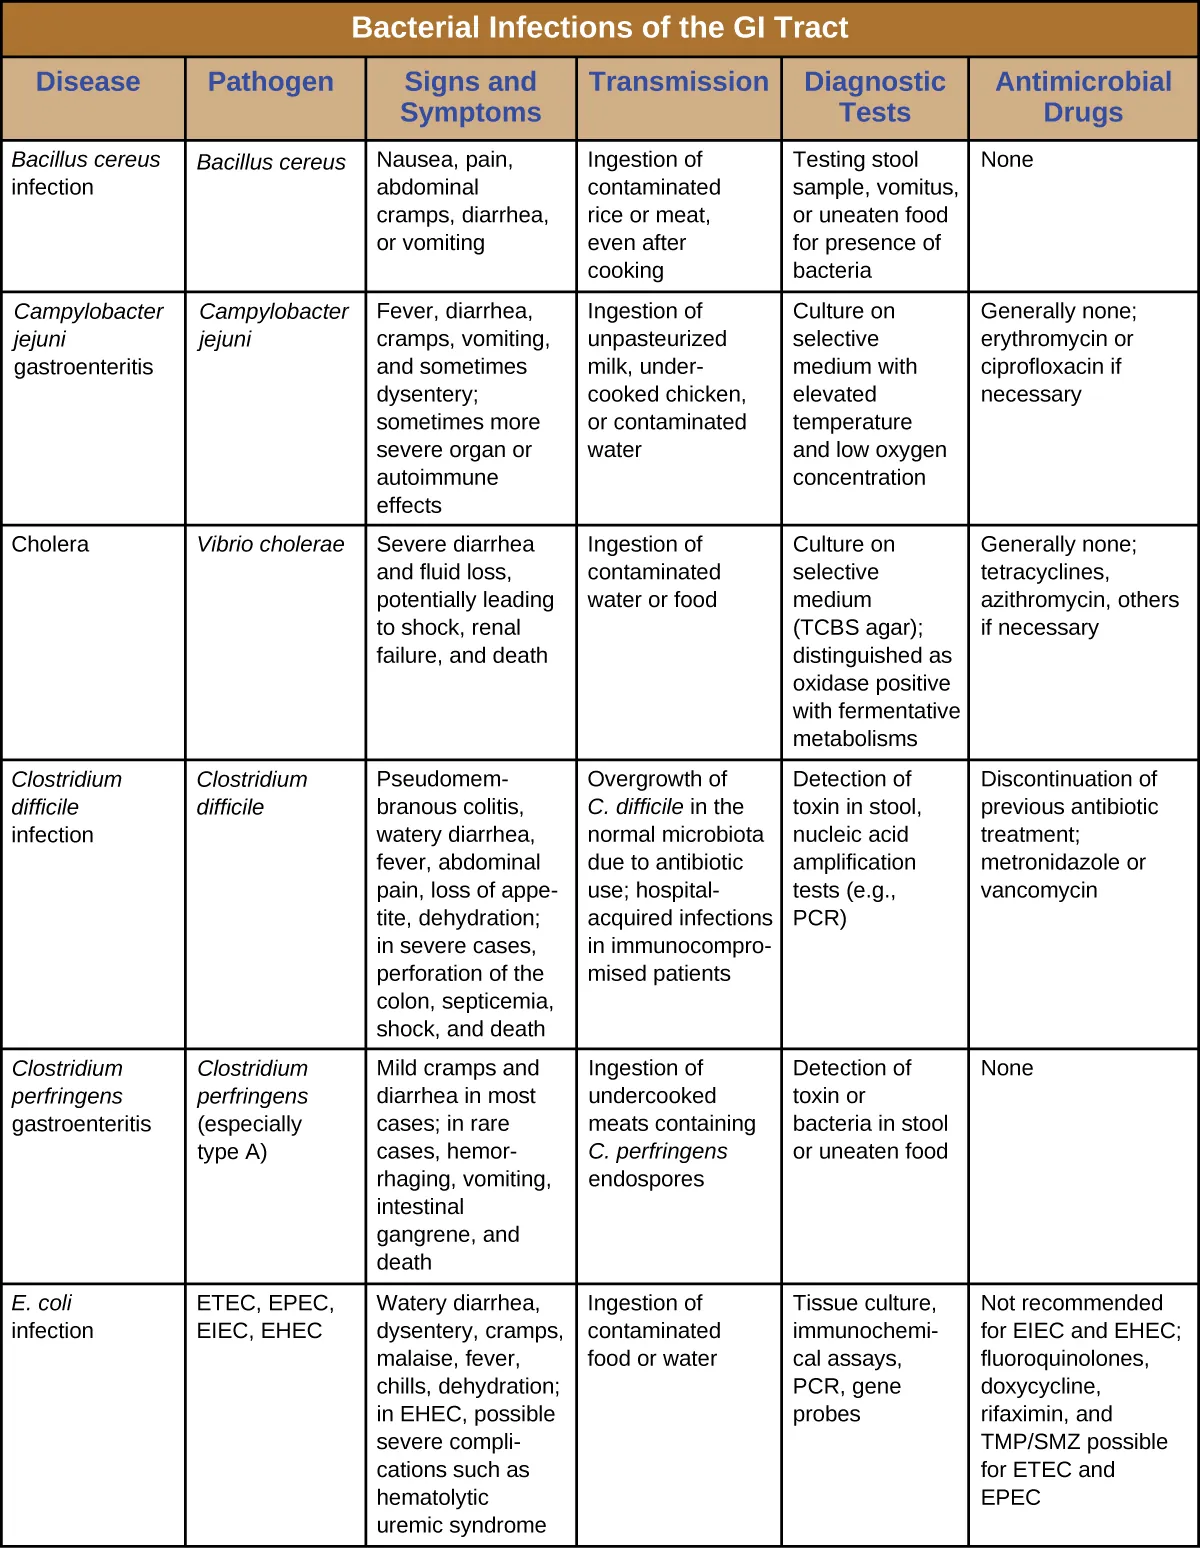 Table titled: Bacterial Infections of the GI Tract. Columns: Disease, Pathogen, Signs and Symptoms, Transmission, Diagnostic Tests, Antimicrobial Drugs. Bacillus cereus infection, Bacillus cereus; Nausea, pain, abdominal cramps, diarrhea or vomiting ; Ingestion of contaminated rice or meat, even after cooking; Testing stool sample, vomitus, or uneaten food for presence of bacteria; None. Campylobacter jejuni gastroenteritis; Campylobacter jejuni; Fever, diarrhea, cramps, vomiting, and sometimes dysentery; sometimes more severe organ or autoimmune effects; Ingestion of unpasteurized milk, undercooked chicken, or contaminated water; Culture on selective medium with elevated temperature and low oxygen concentration; Generally none; erythromycin or ciprofloxacin if necessary. Cholera; Vibrio cholera; Severe diarrhea and fluid loss, potentially leading to shock, renal failure, and death; Ingestion of contaminated water or food; Culture on selective medium (TCBS agar); distinguished as oxidase positive with fermentative metabolisms; Generally none; tetracyclines, azithromycin, others if necessary. Clostridium difficile infection; Clostridium difficile; Pseudomembranous colitis, watery diarrhea, fever, abdominal pain, loss of appetite, dehydration; in severe cases, perforation of the colon, septicemia, shock, and death; Overgrowth of C. difficile in the normal microbiota due to antibiotic use; hospital-acquired infections in immunocompromised patients; Detection of toxin in stool, nucleic acid amplification tests (e.g., PCR); Discontinuation of previous antibiotic treatment; metronidazole or vancomycin. Clostridium perfringens gastroenteritis; Clostridium perfringens (especially type A); Mild cramps and diarrhea in most cases; in rare cases, hemorrhaging, vomiting, intestinal gangrene, and death; Ingestion of undercooked meats containing C. perfringens endospores; Detection of toxin or bacteria in stool or uneaten food; None. E. coli infection; ETEC, EPEC, EIEC, EHEC ; Watery diarrhea, dysentery, cramps, malaise, fever, chills, dehydration; in EHEC, possible severe complications such as hematolytic uremic syndrome; Ingestion of contaminated food or water; Tissue culture, immunochemical assays, PCR, gene probes; Not recommended for EIEC and EHEC; fluoroquinolones, doxycycline, rifaximin, and TMP/SMZ possible for ETEC and EPEC.